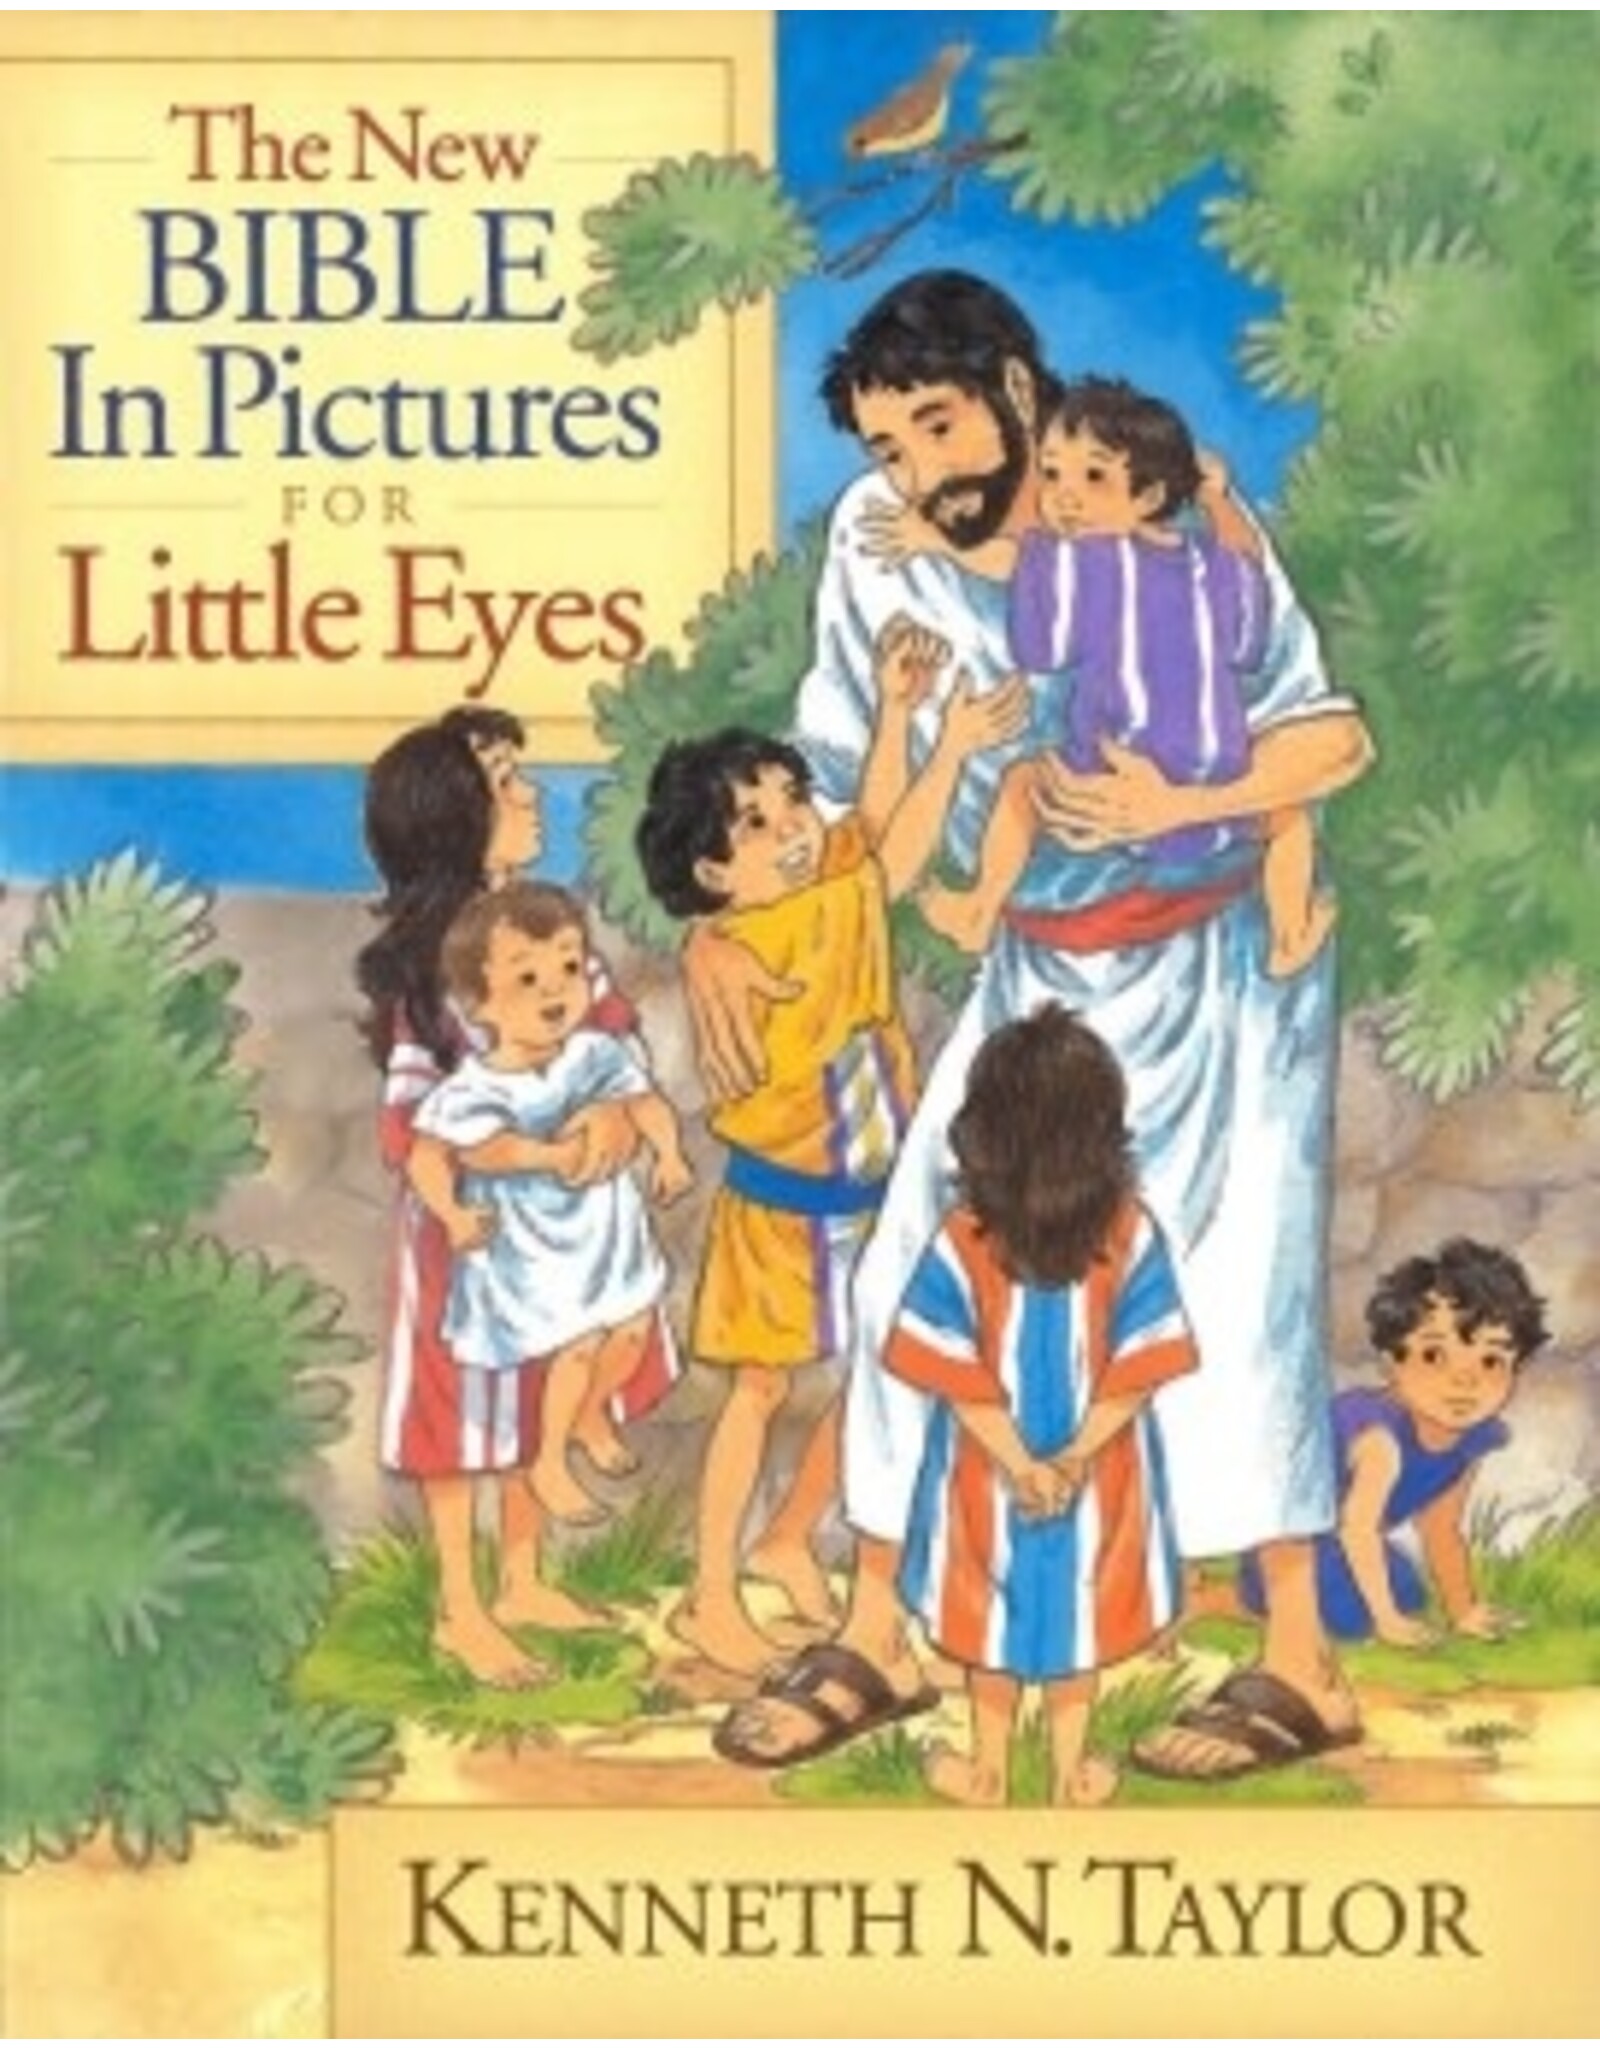 Kenneth N. Taylor The New Bible In Pictures for Little Eyes